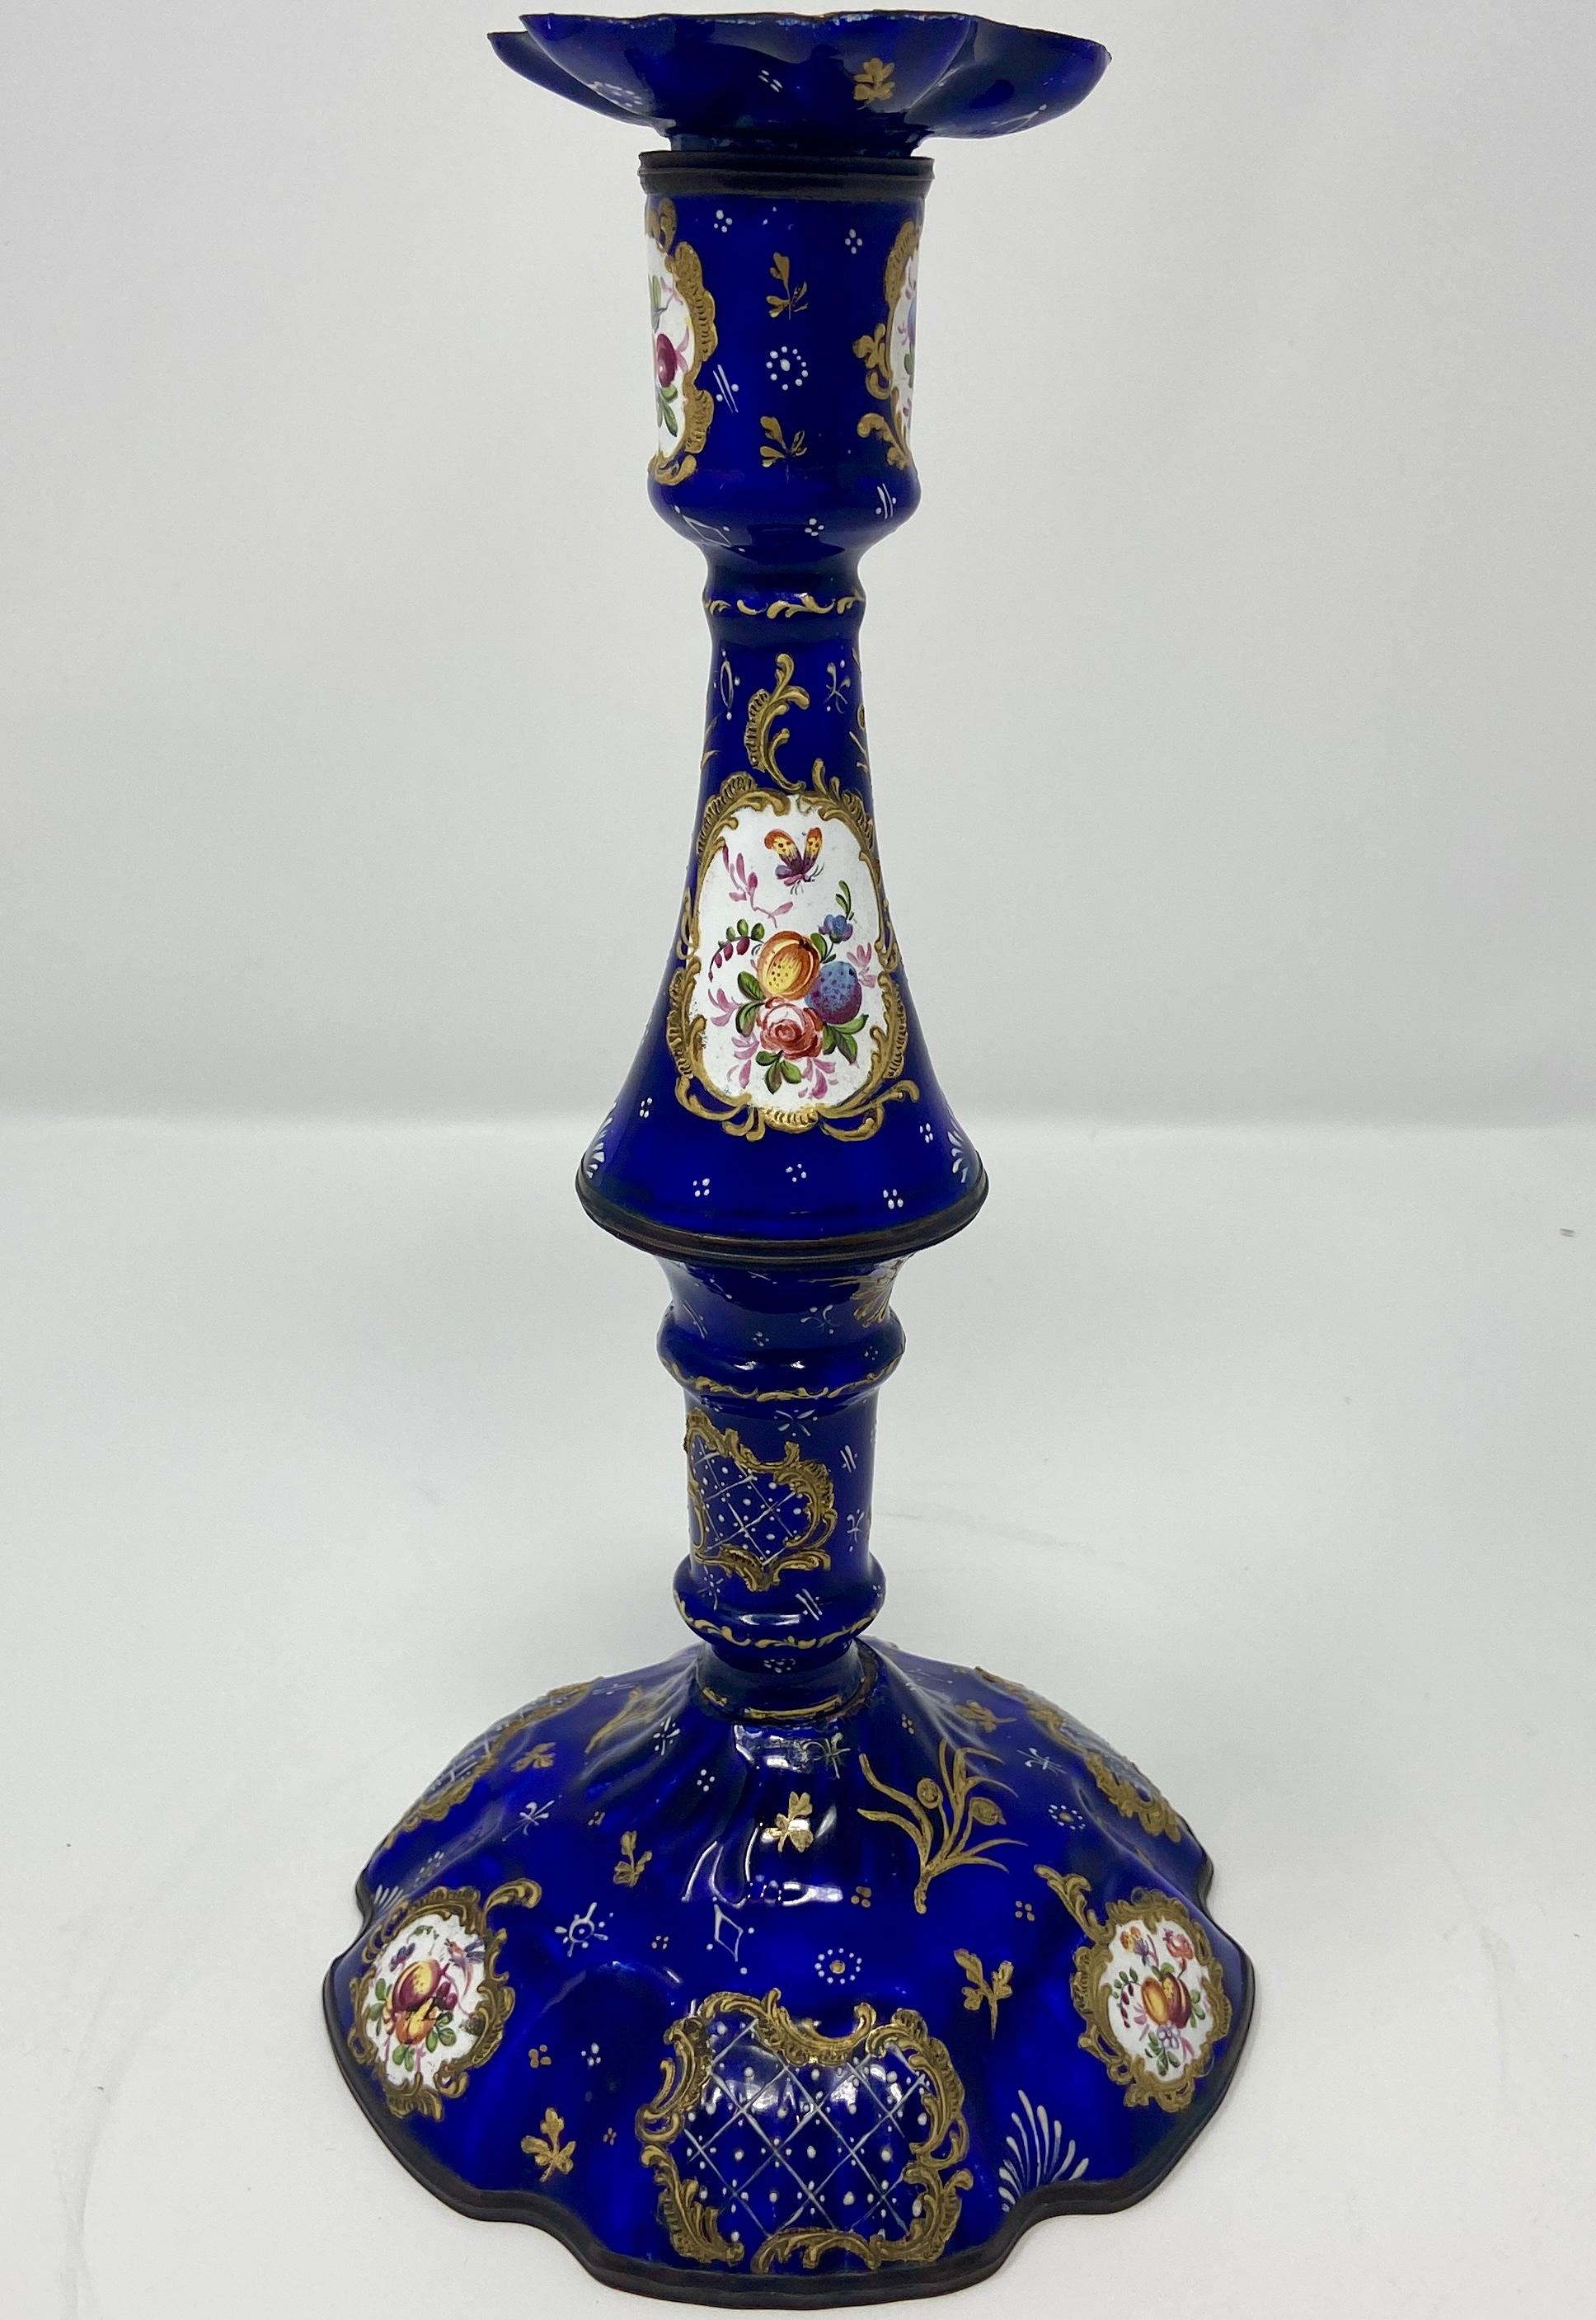 Pair antique French hand-painted blue enameled porcelain candlesticks, circa 1840.